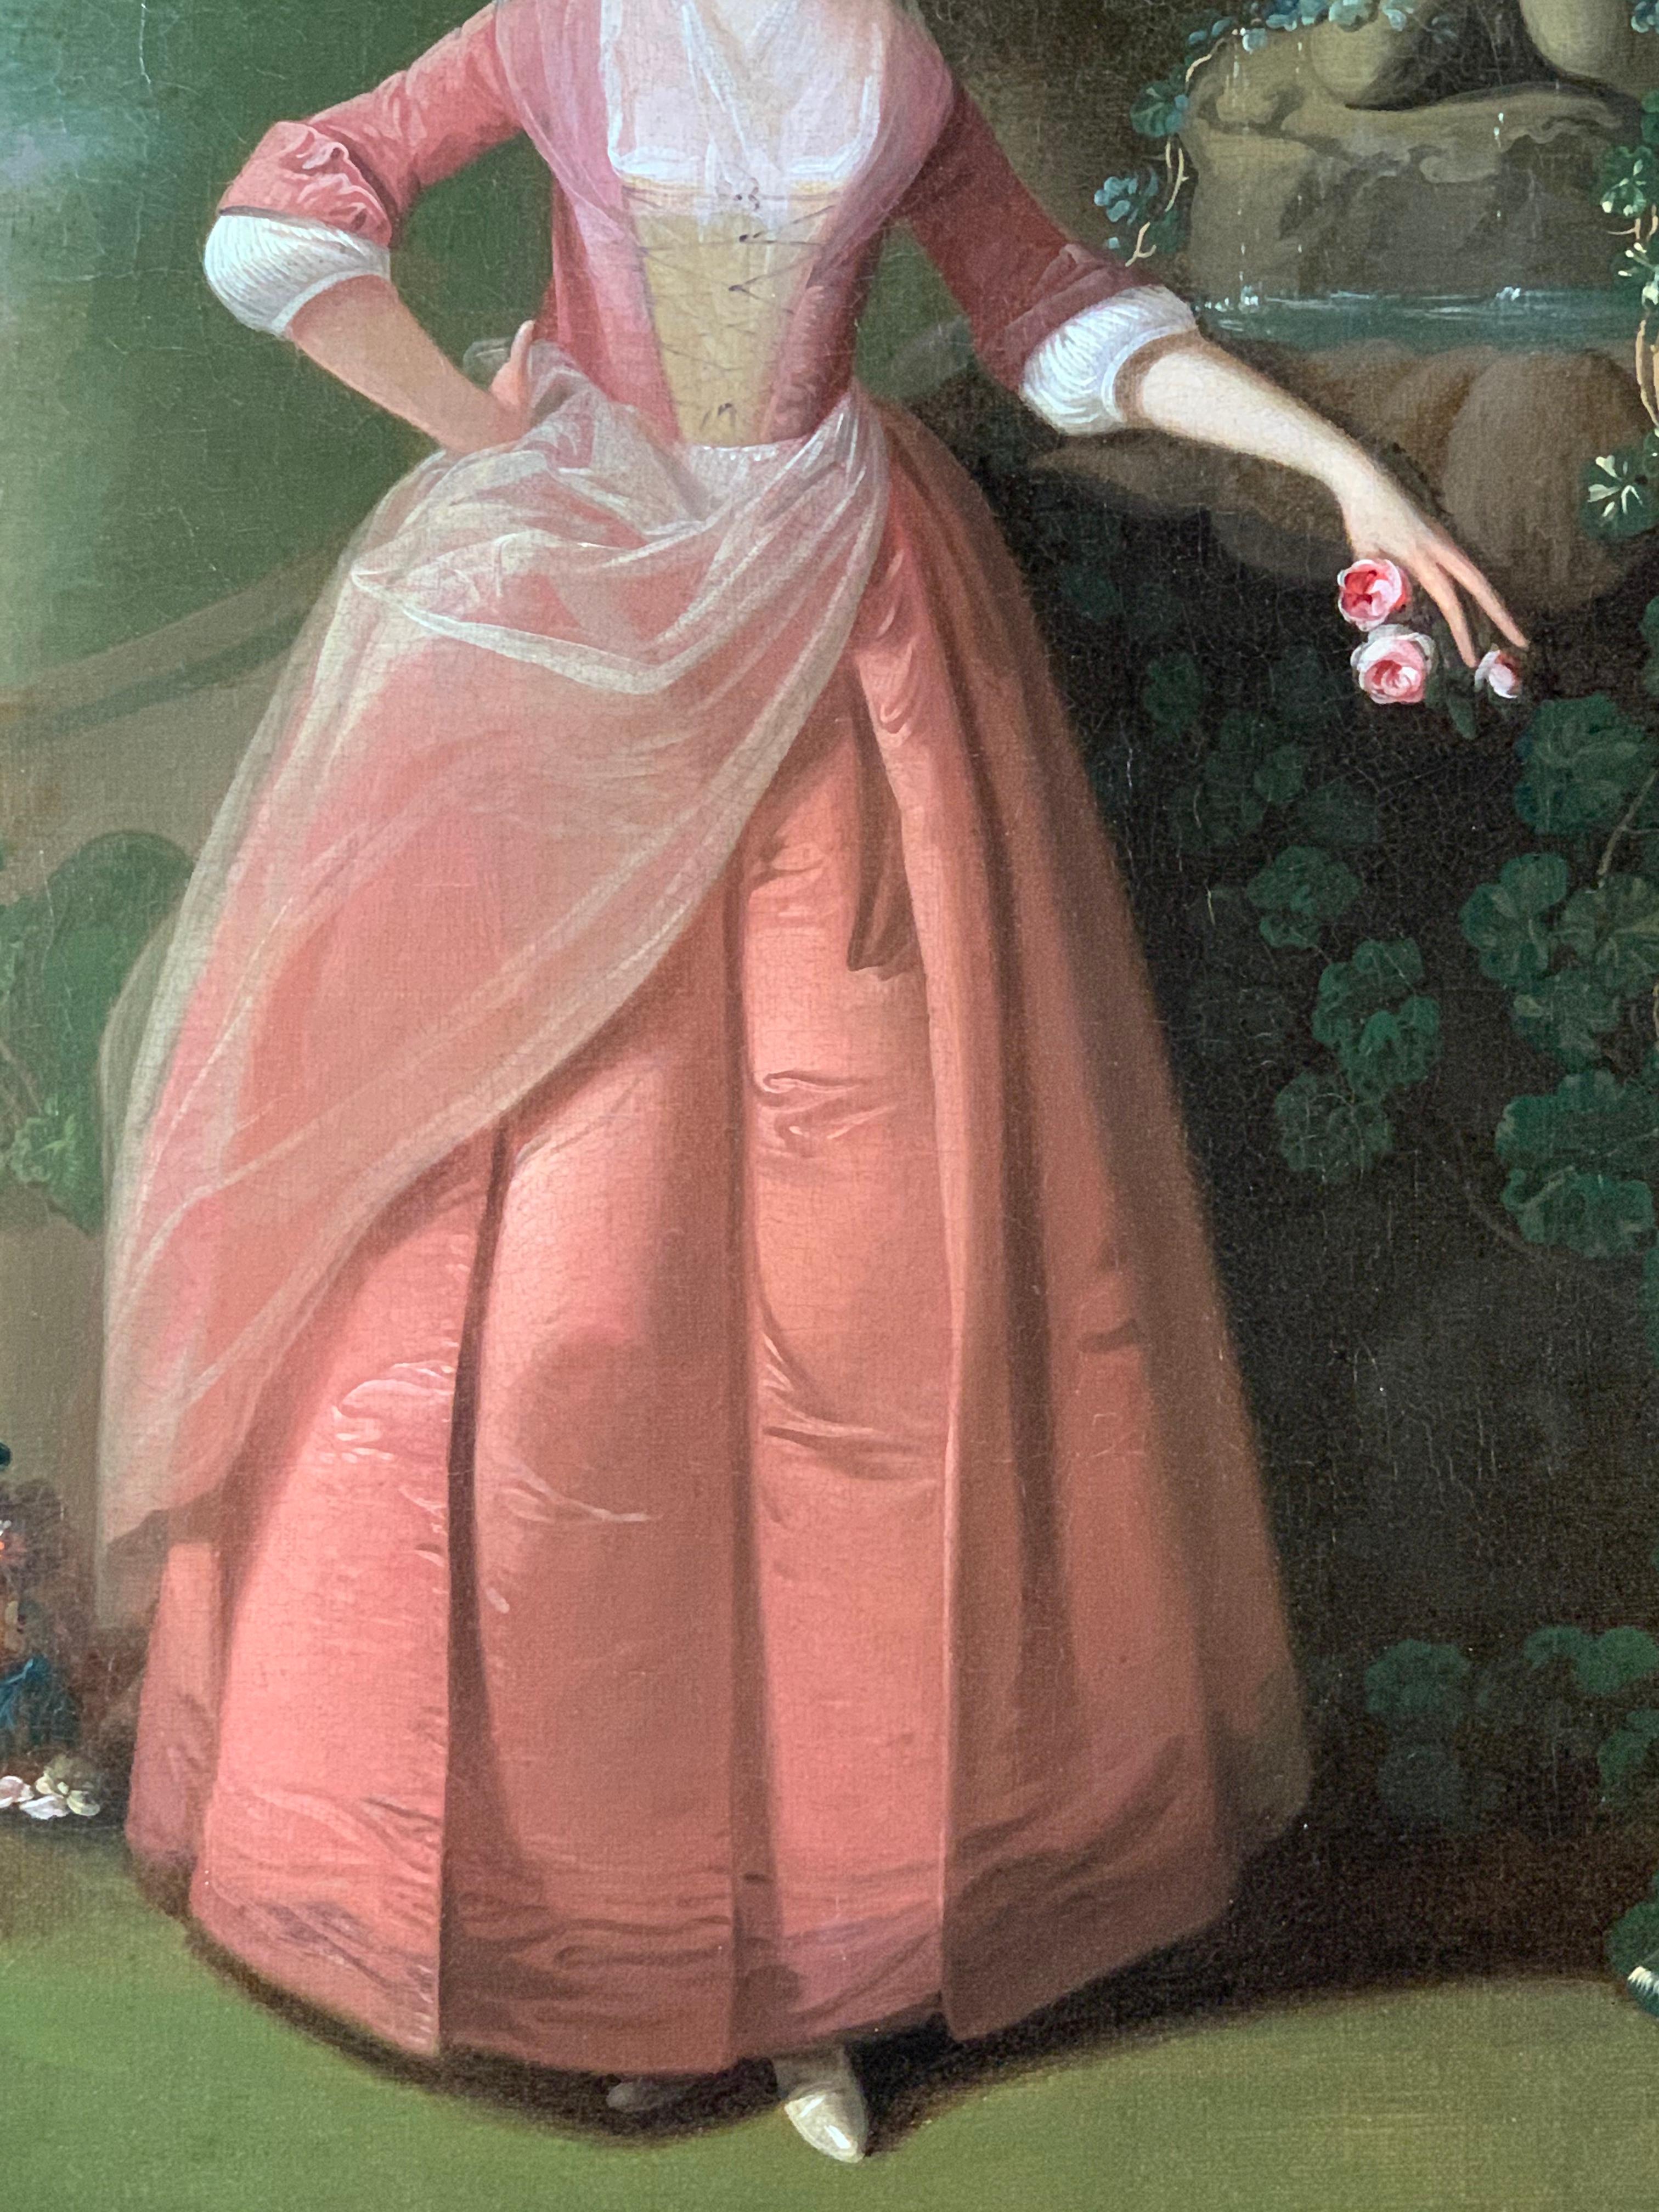 PORTRAIT OF MRS. BARRATT OF POTTLEY HALL WEARING A PINK DRESS IN A CLASSICAL GARDEN WITH A DOG AND AND A BASKET OF FLOWERS BESIDE HER.

Period Portraits are thrilled to offer this highly decorative 18th century English portrait of a lady gardener